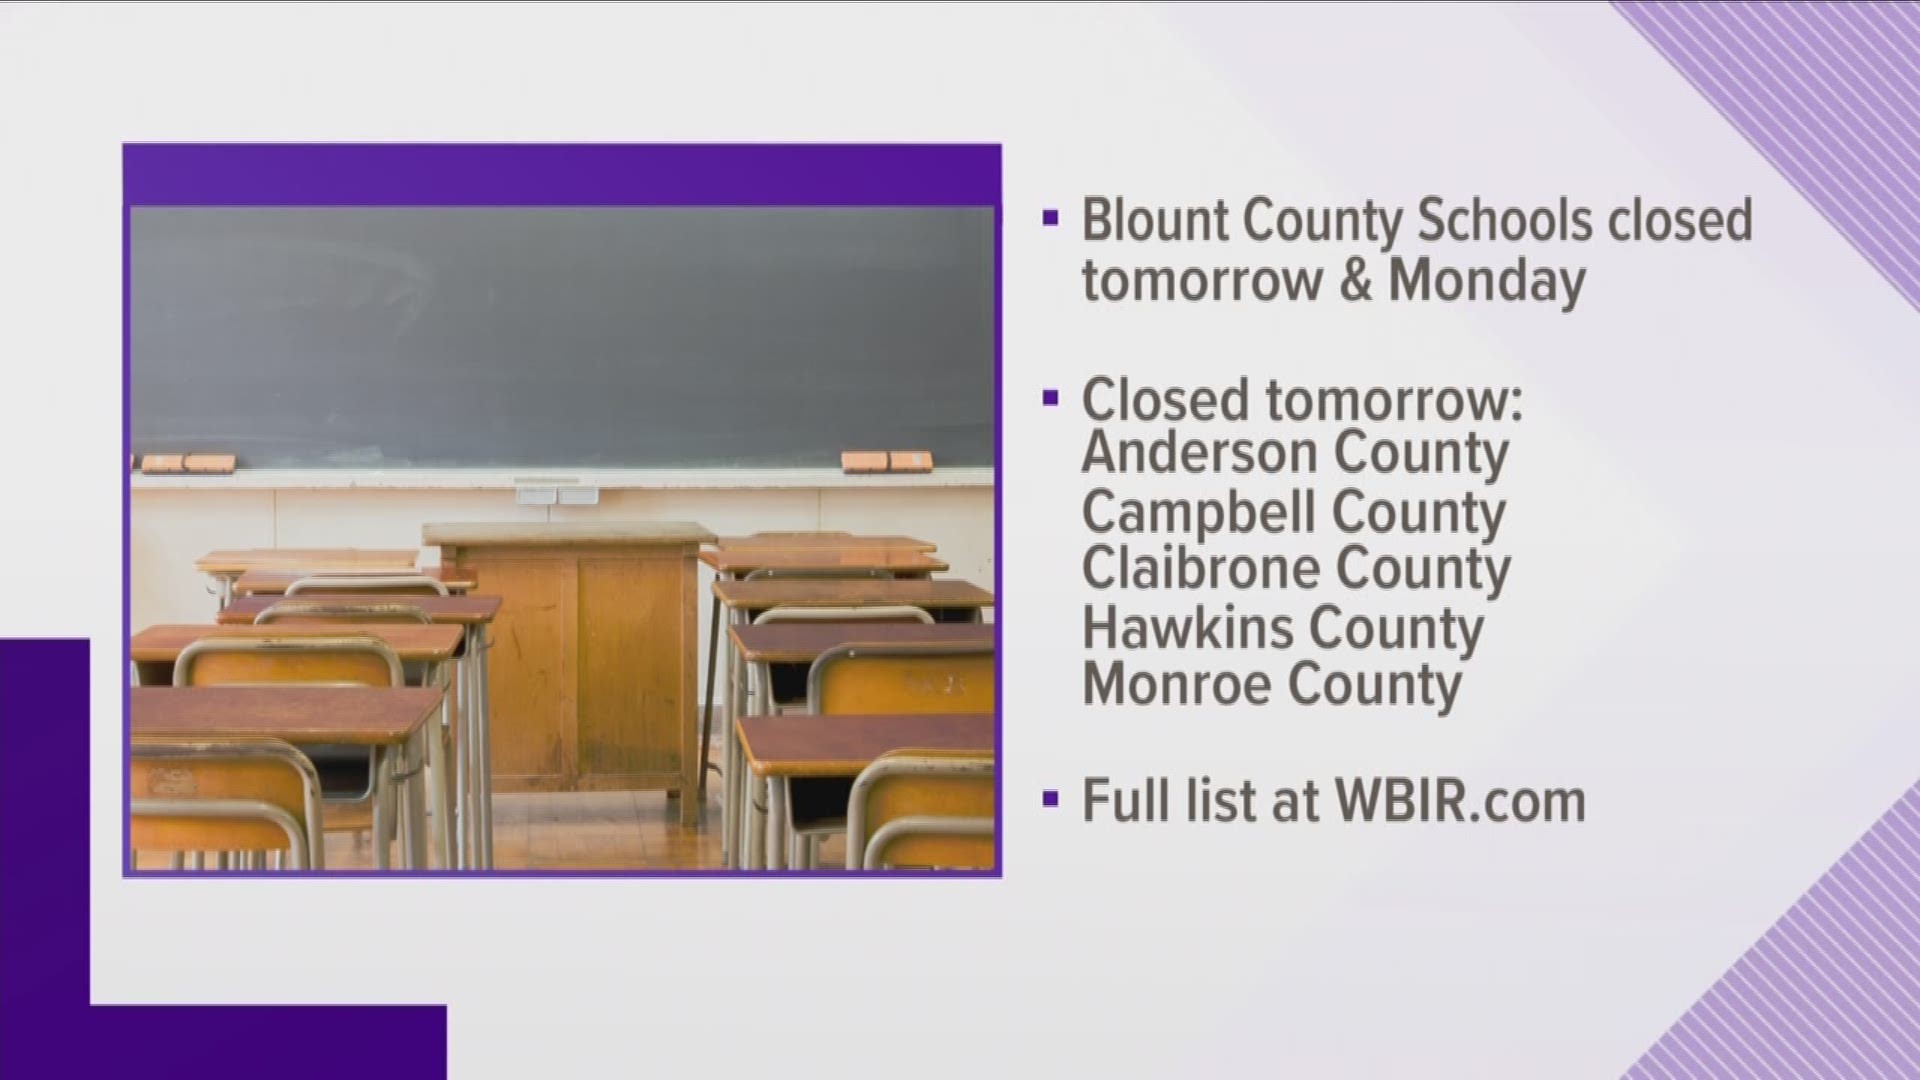 More East Tenenssee schools are closing for widespread illness. Blount County Schools said today it will be closed tomorrow and Monday.